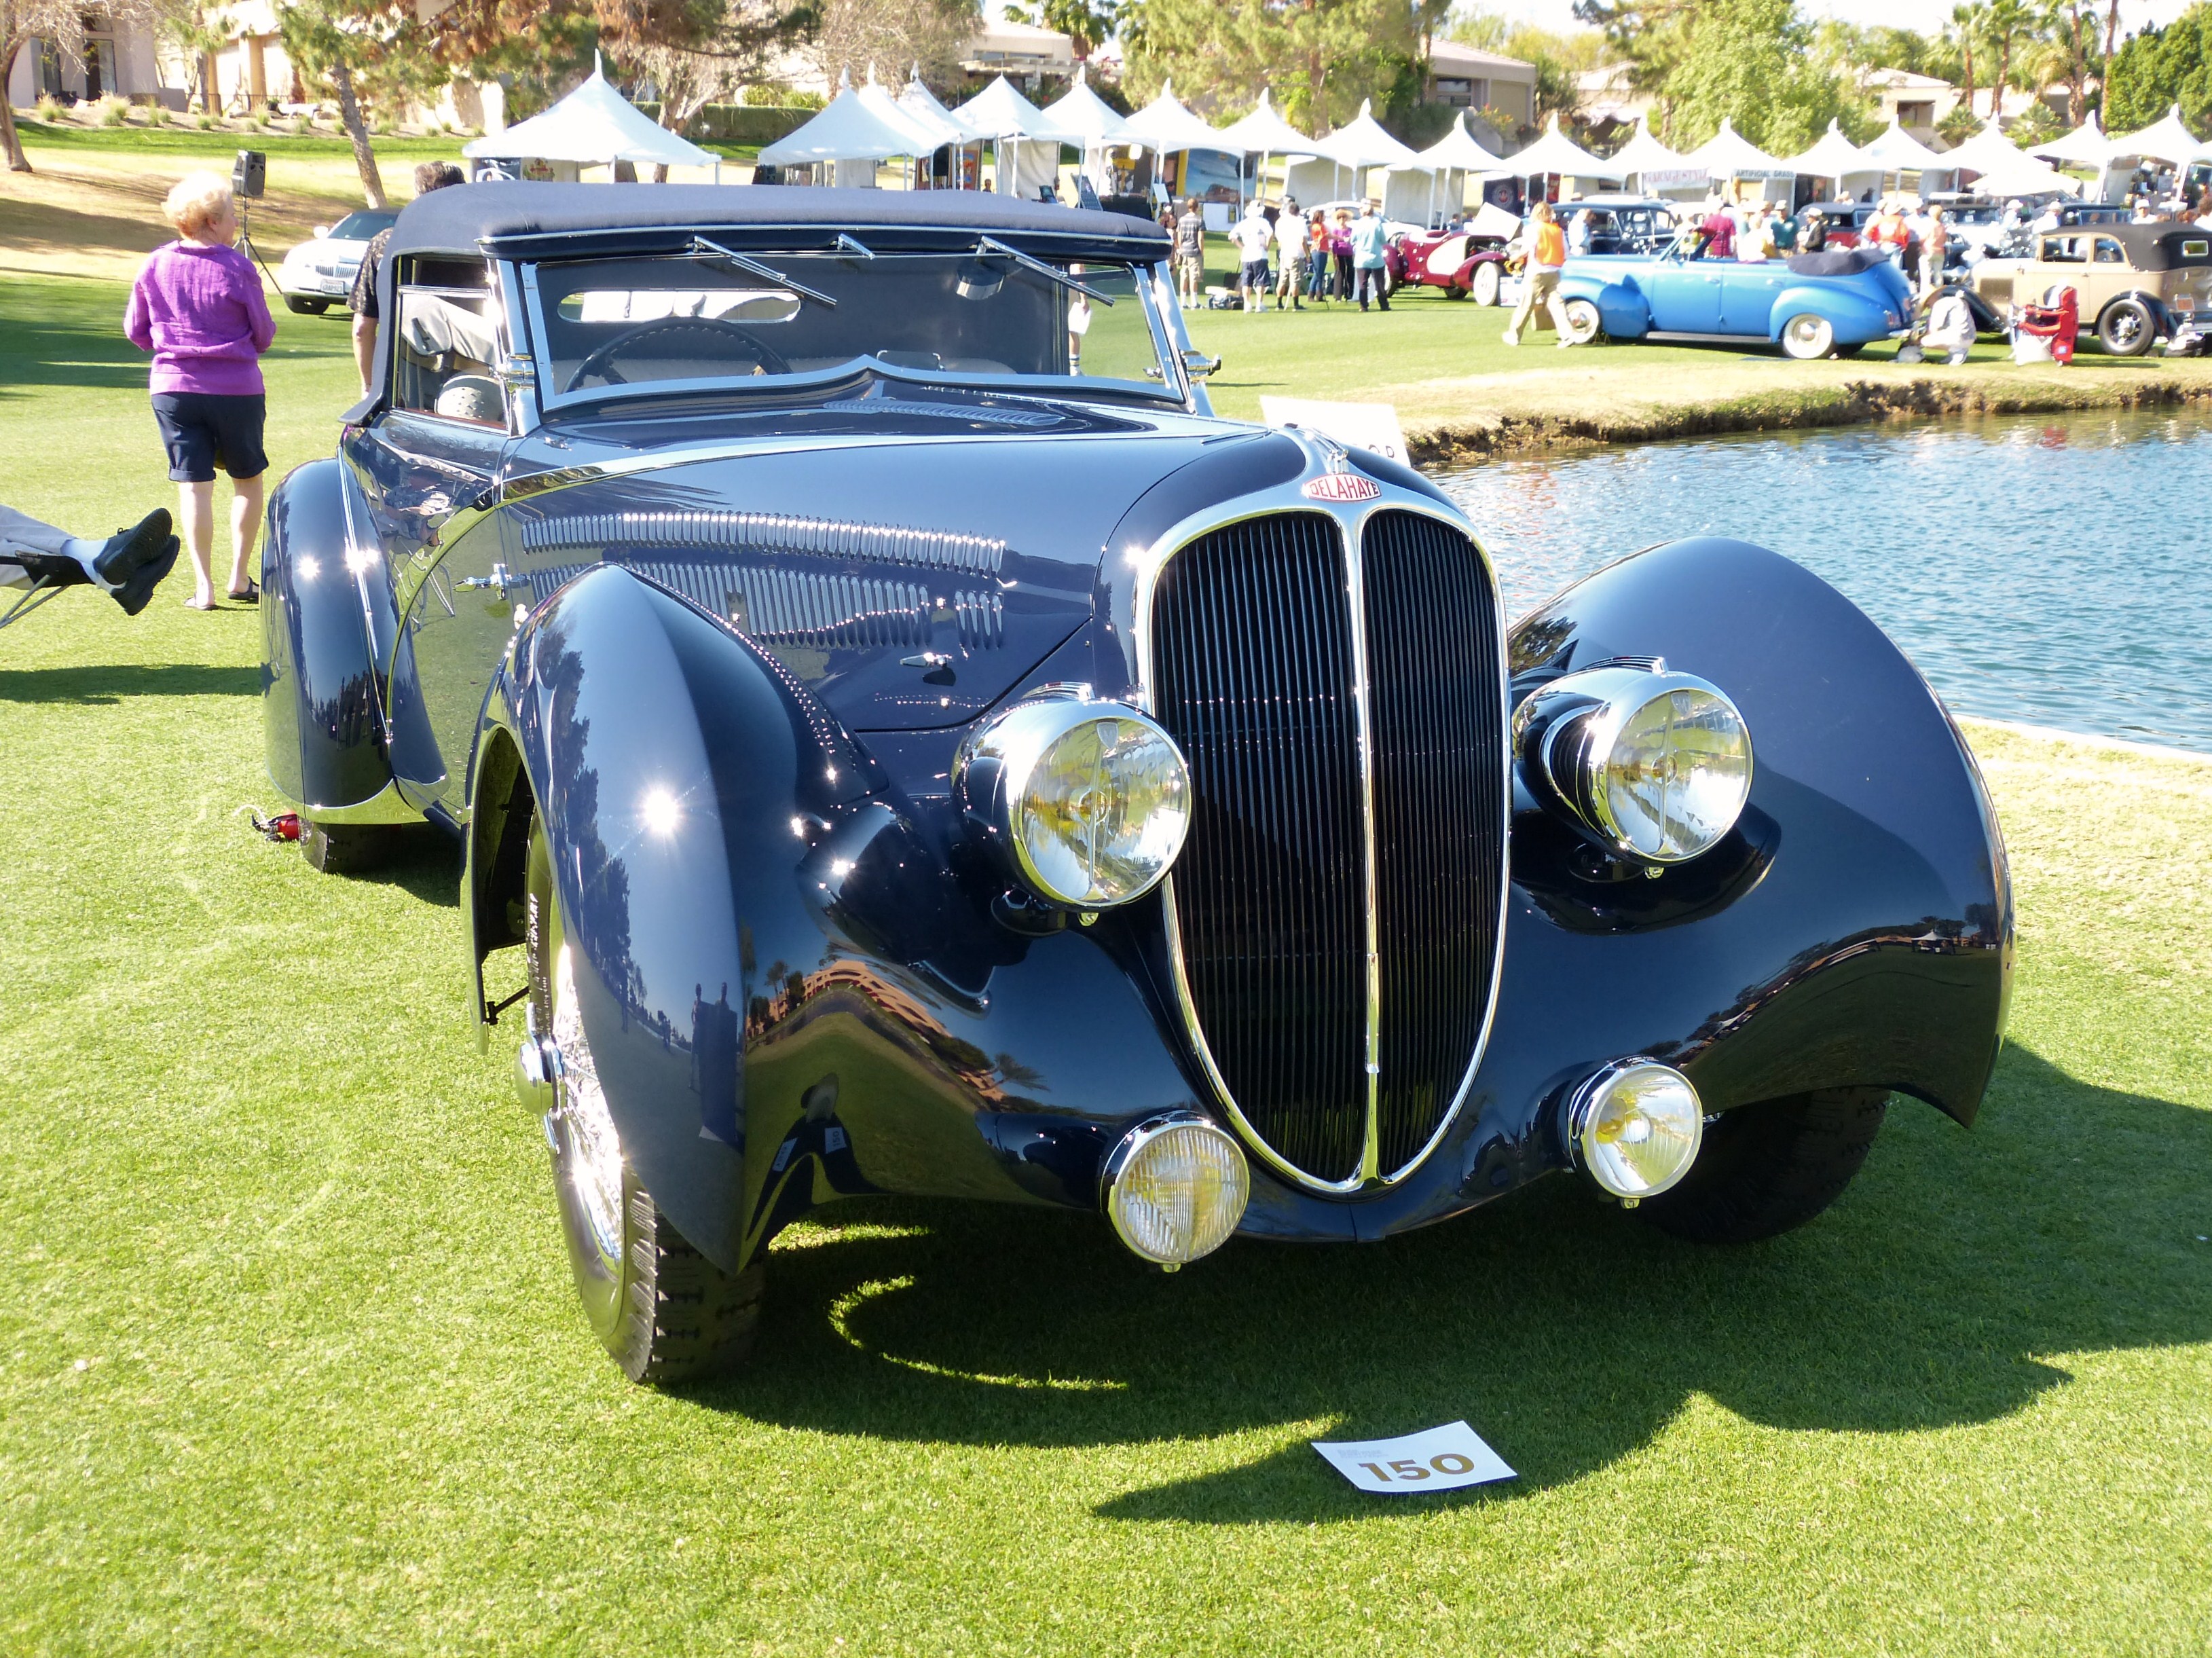 Good news: The REAL Desert Classic Concours d’Elegance Lives